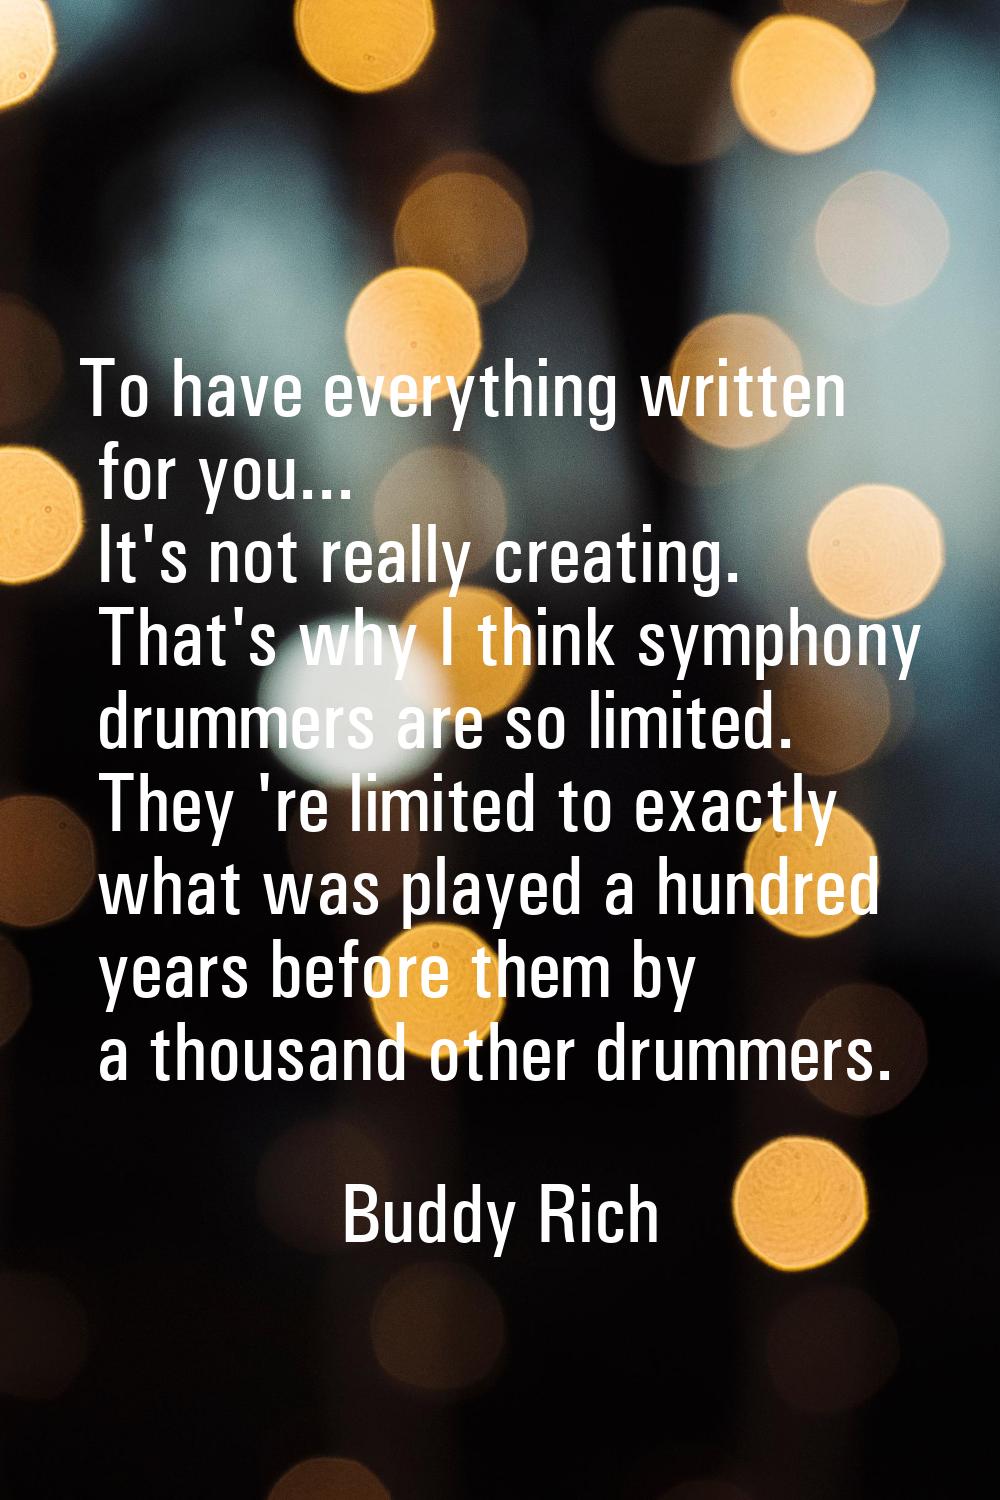 To have everything written for you... It's not really creating. That's why I think symphony drummer